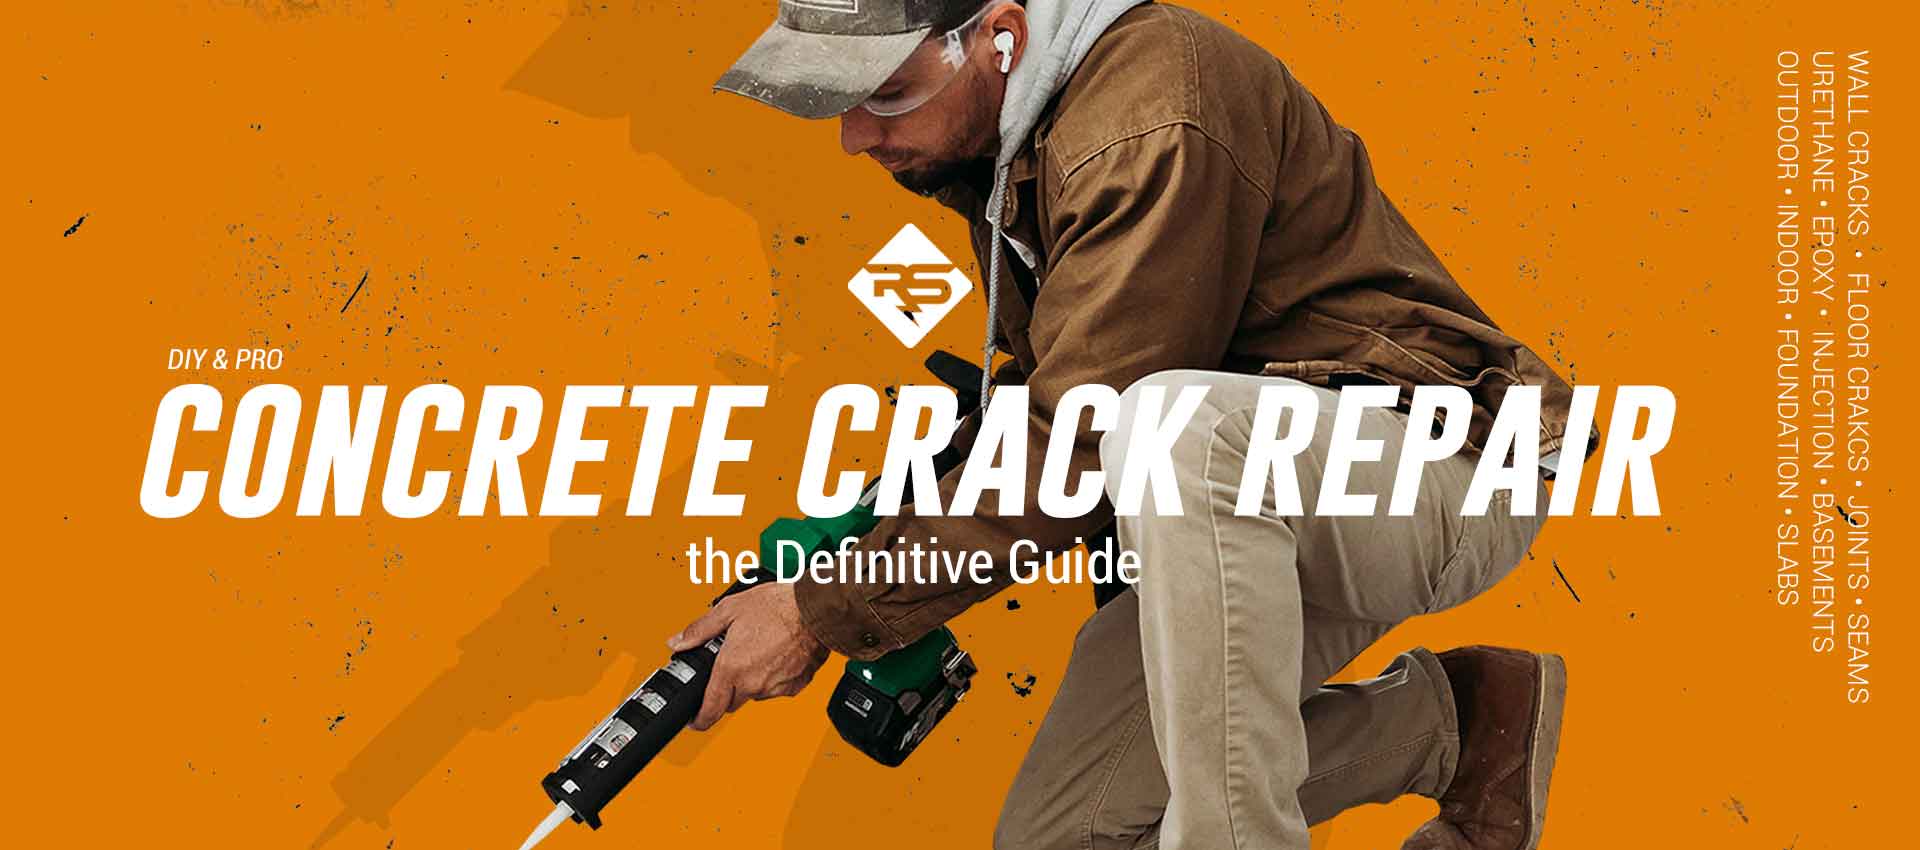 Cracking guide